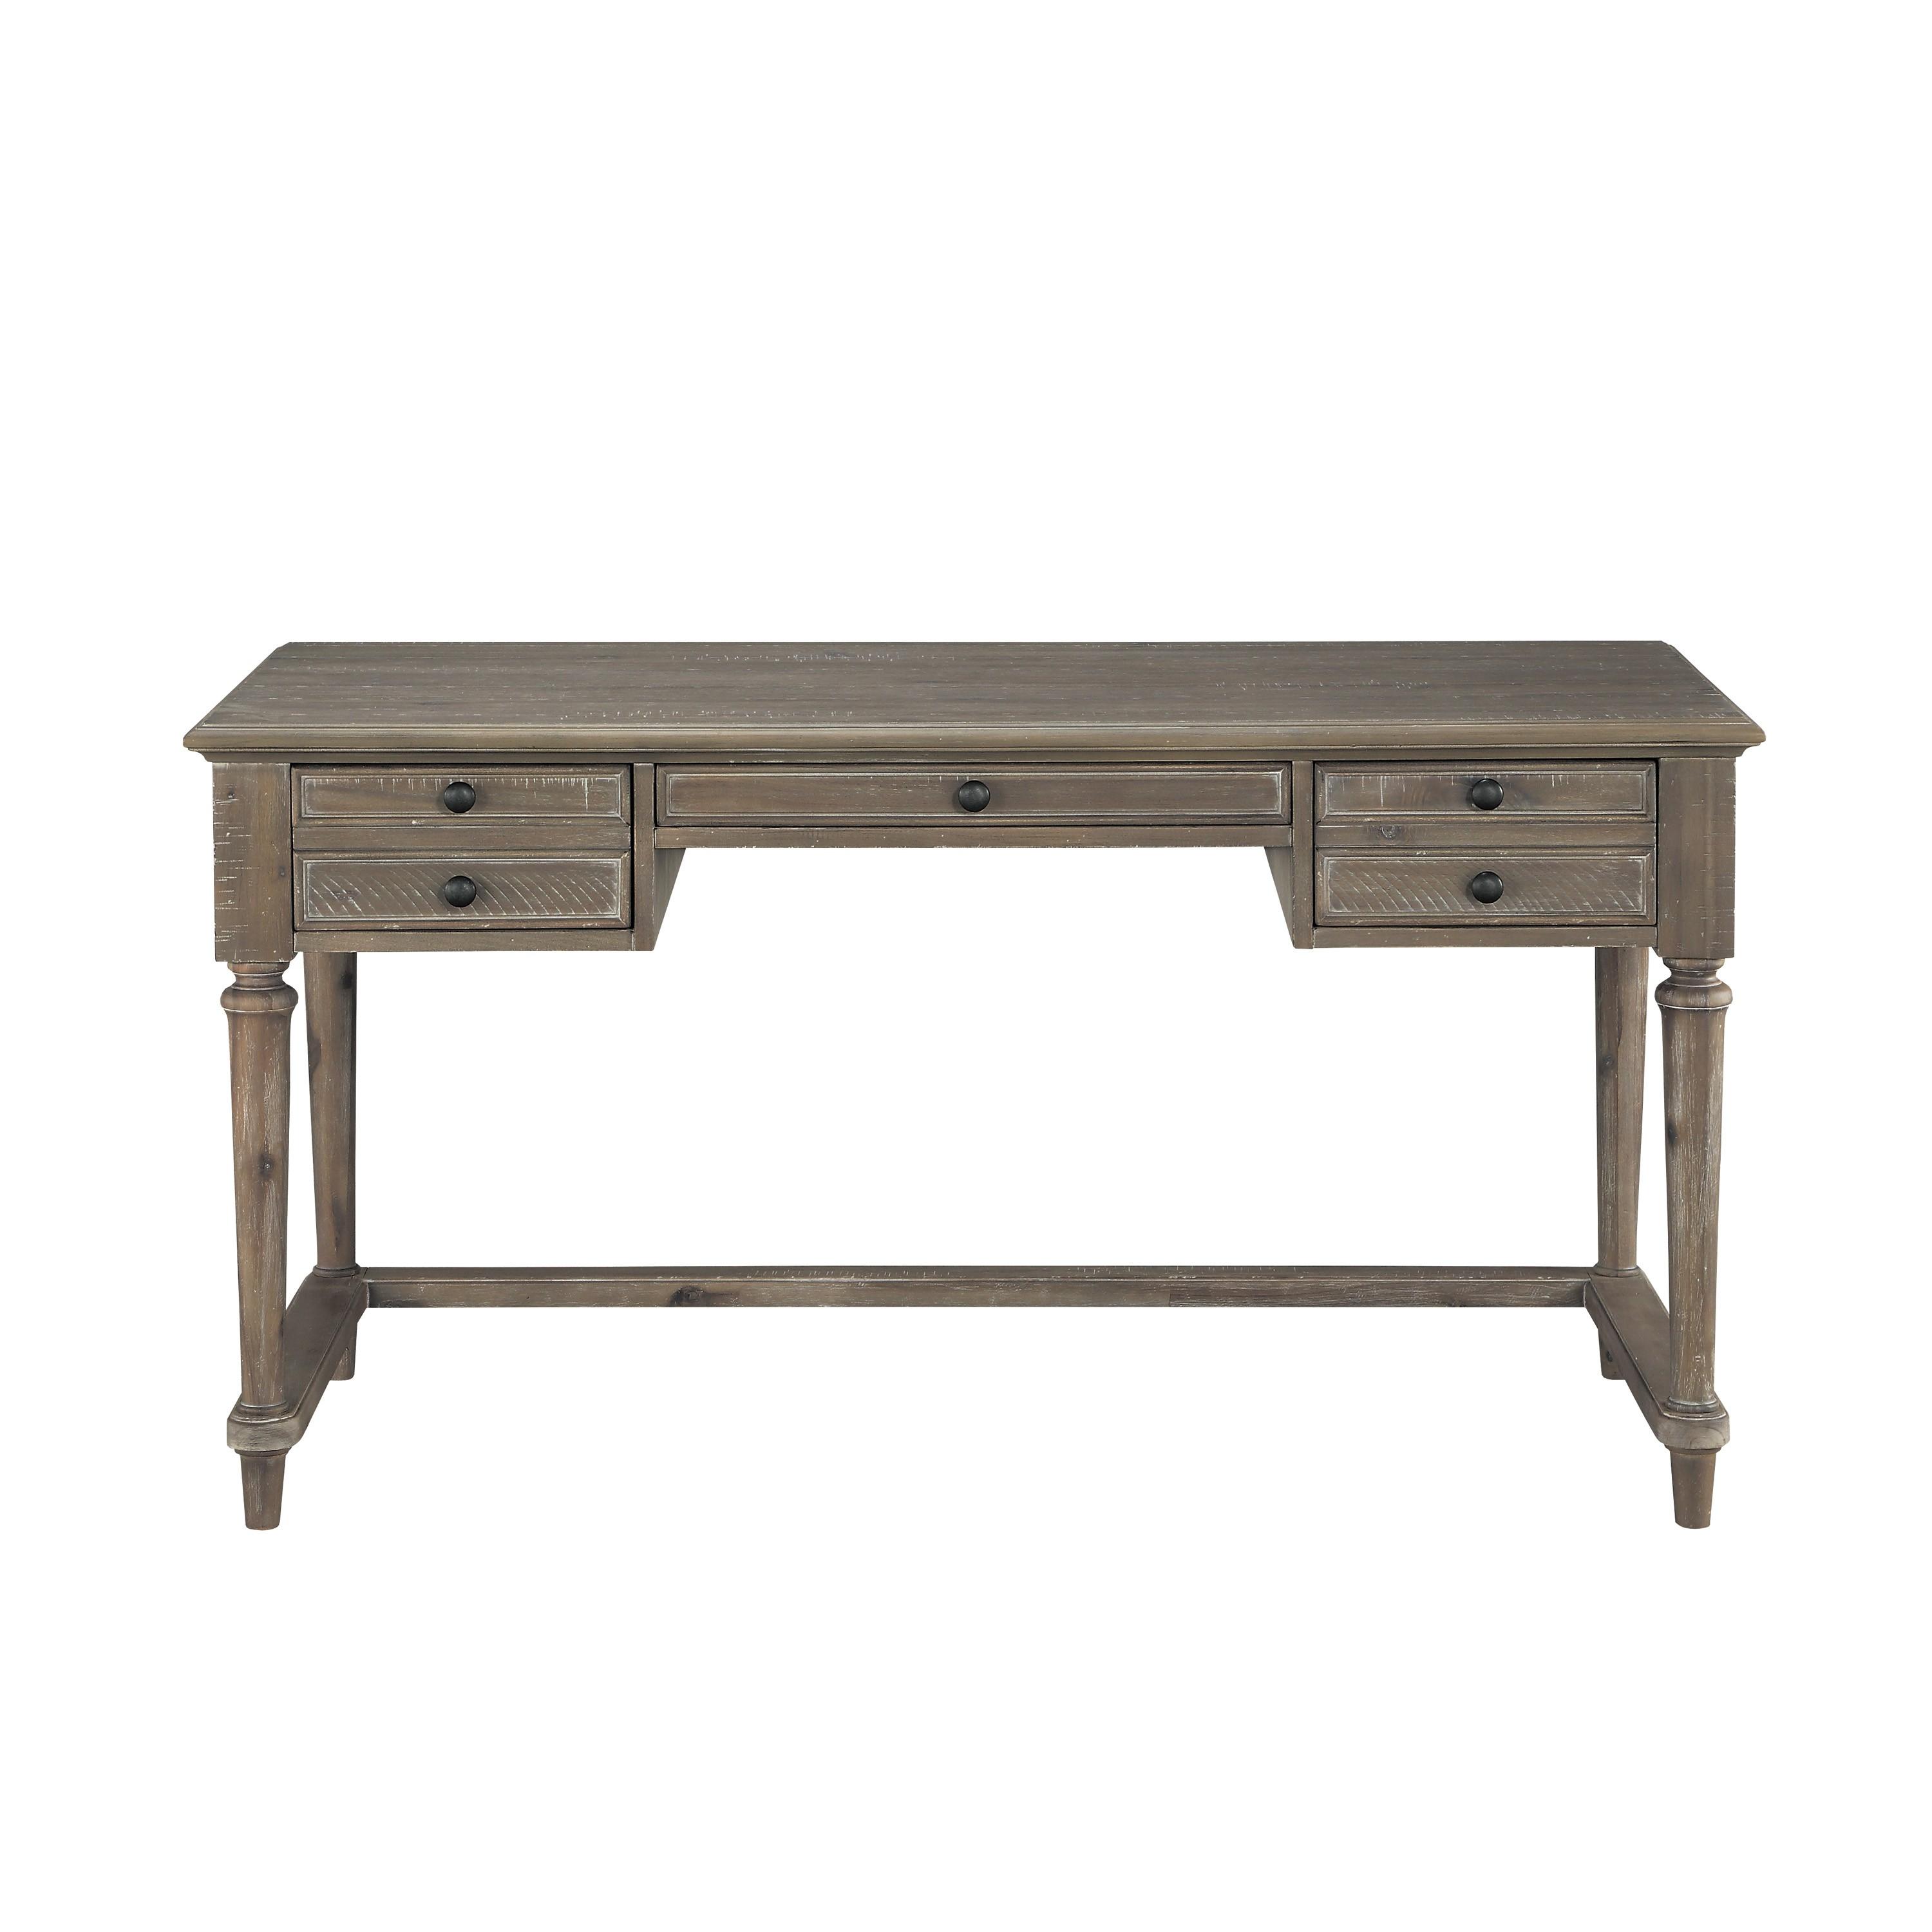 Transitional Writing Desk 1689BR-16 Cardano 1689BR-16 in Light Brown 